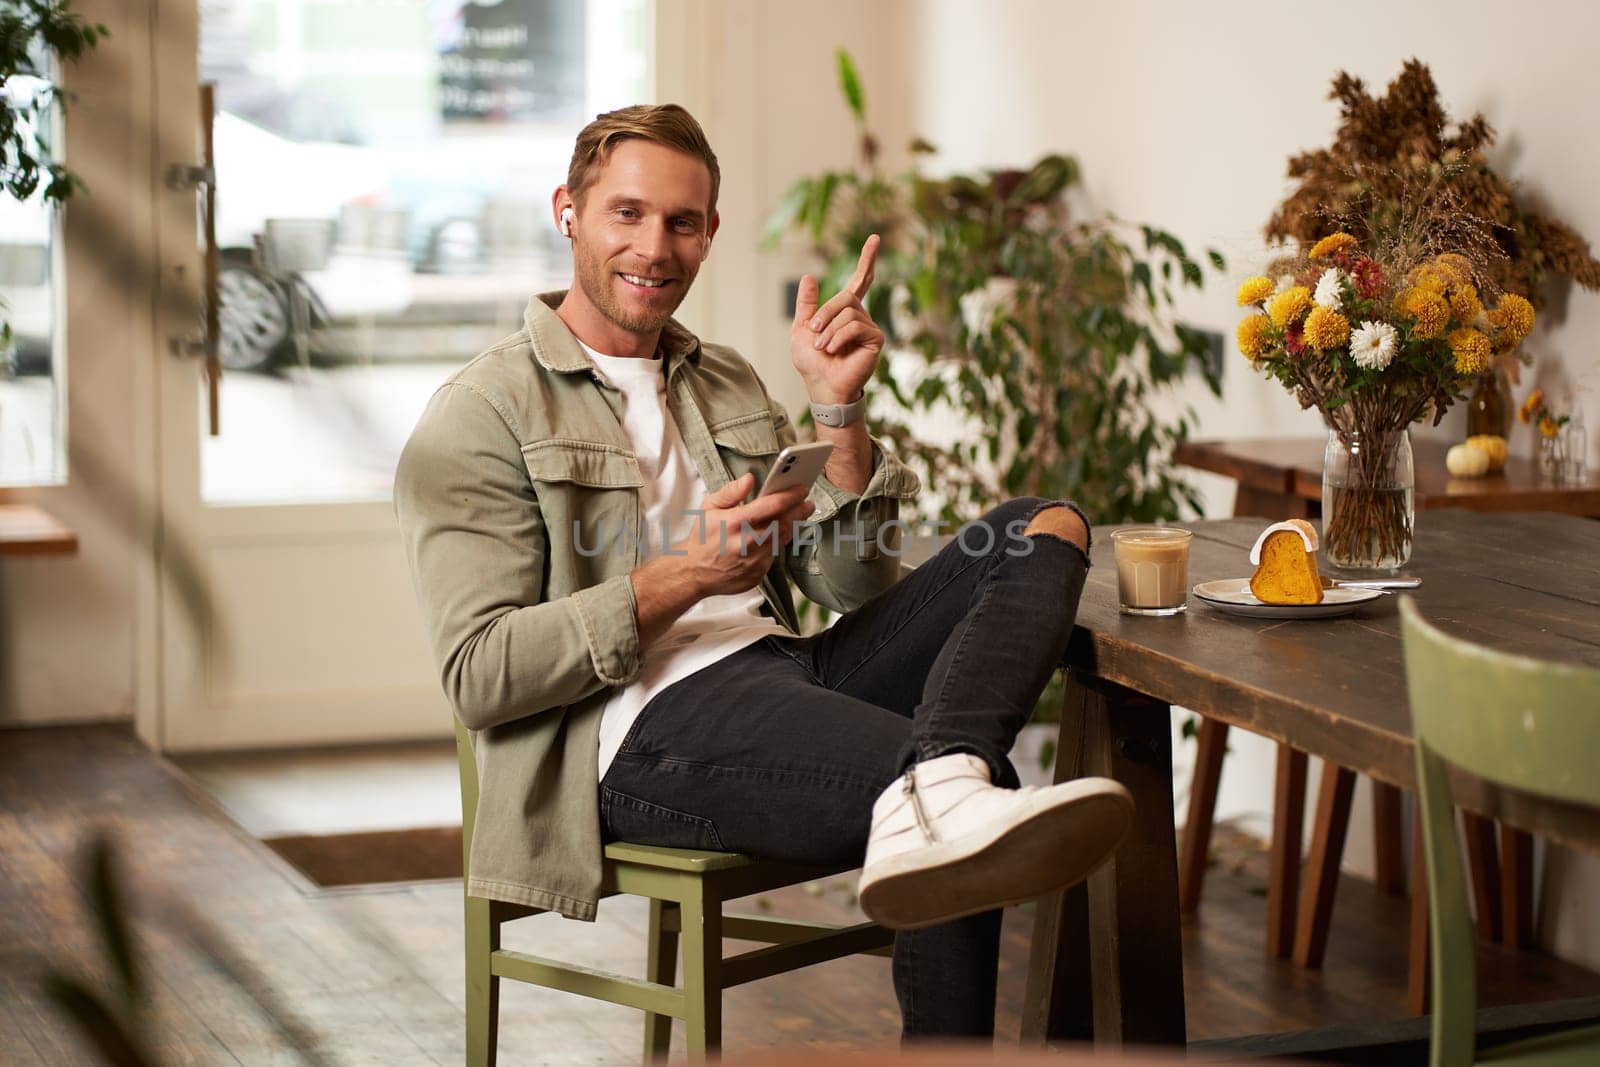 Portrait of happy handsome young man, sitting in cafe with mobile phone, wearing wireless headphones, listening to music or podcast while relaxing in coffee shop.